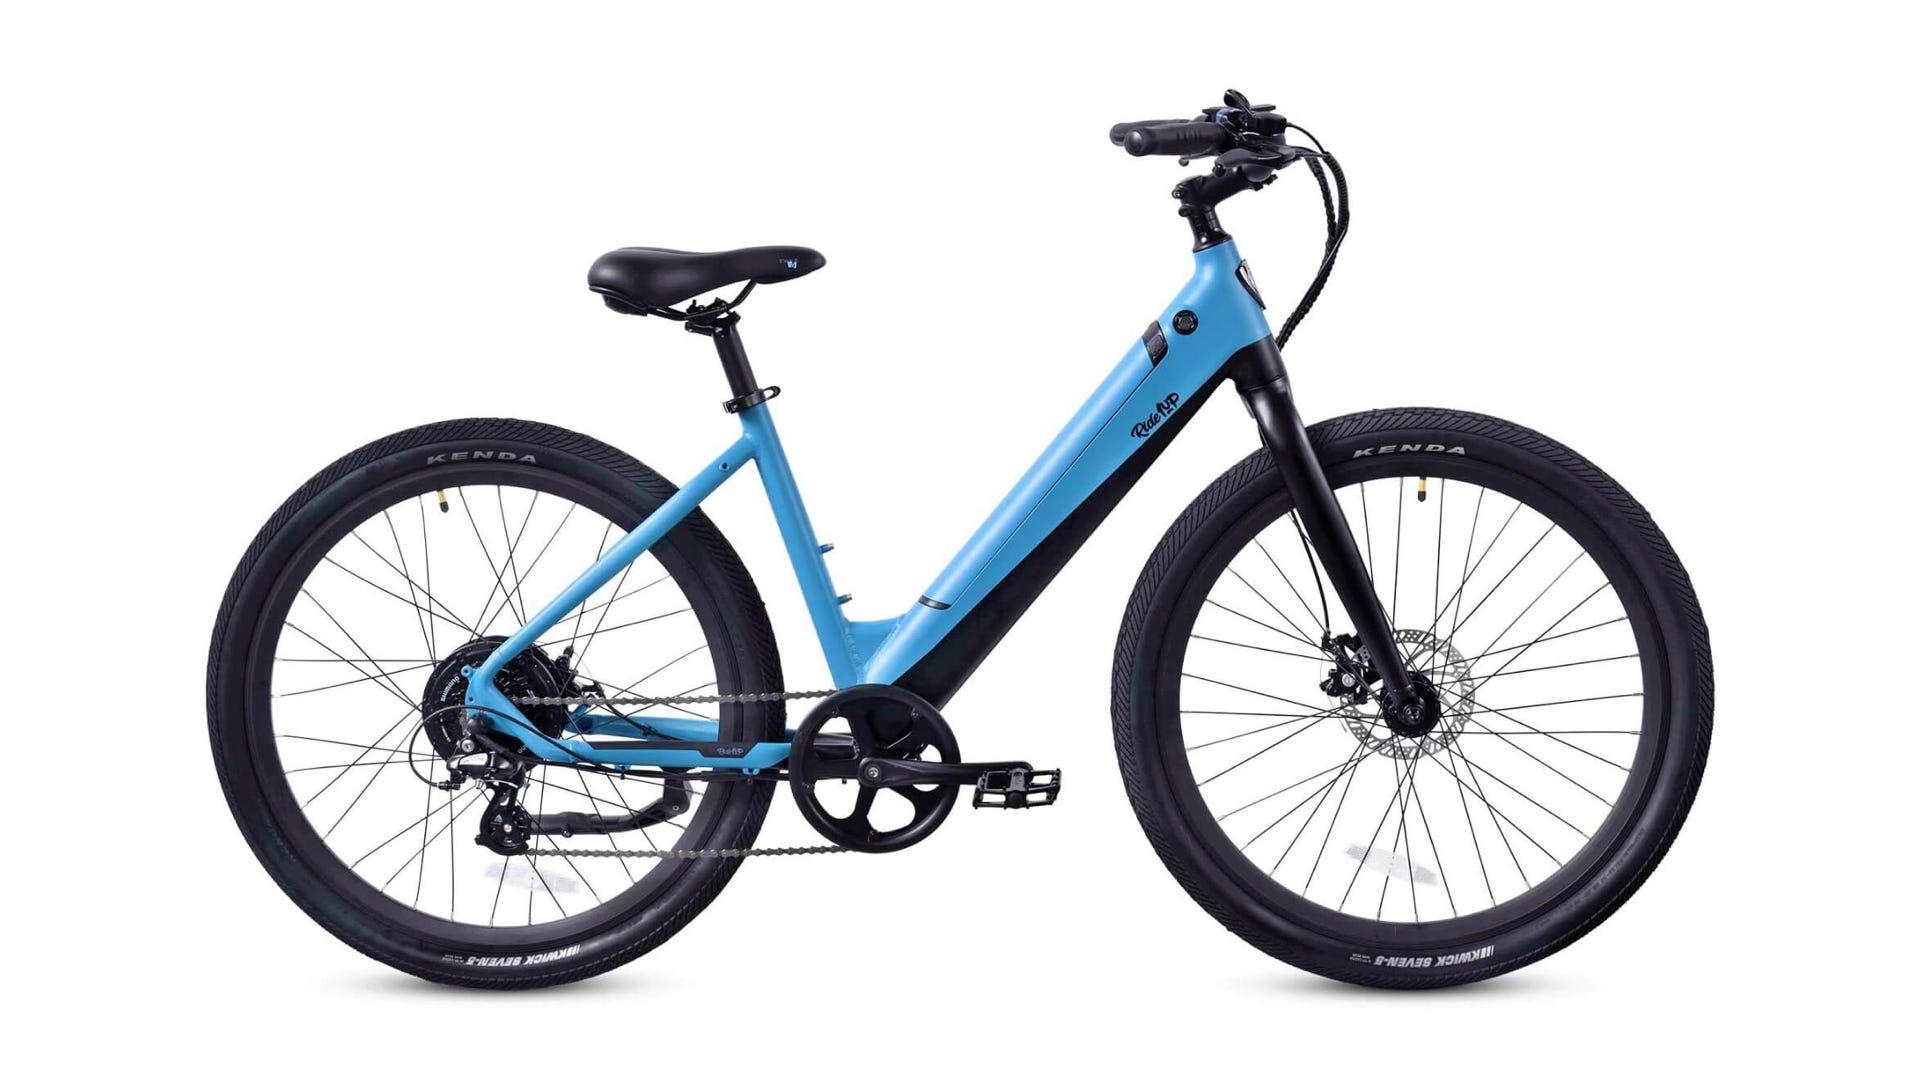 Ride1Up’s Core-5 eBike Gets Major Upgrades For the Same Low Price